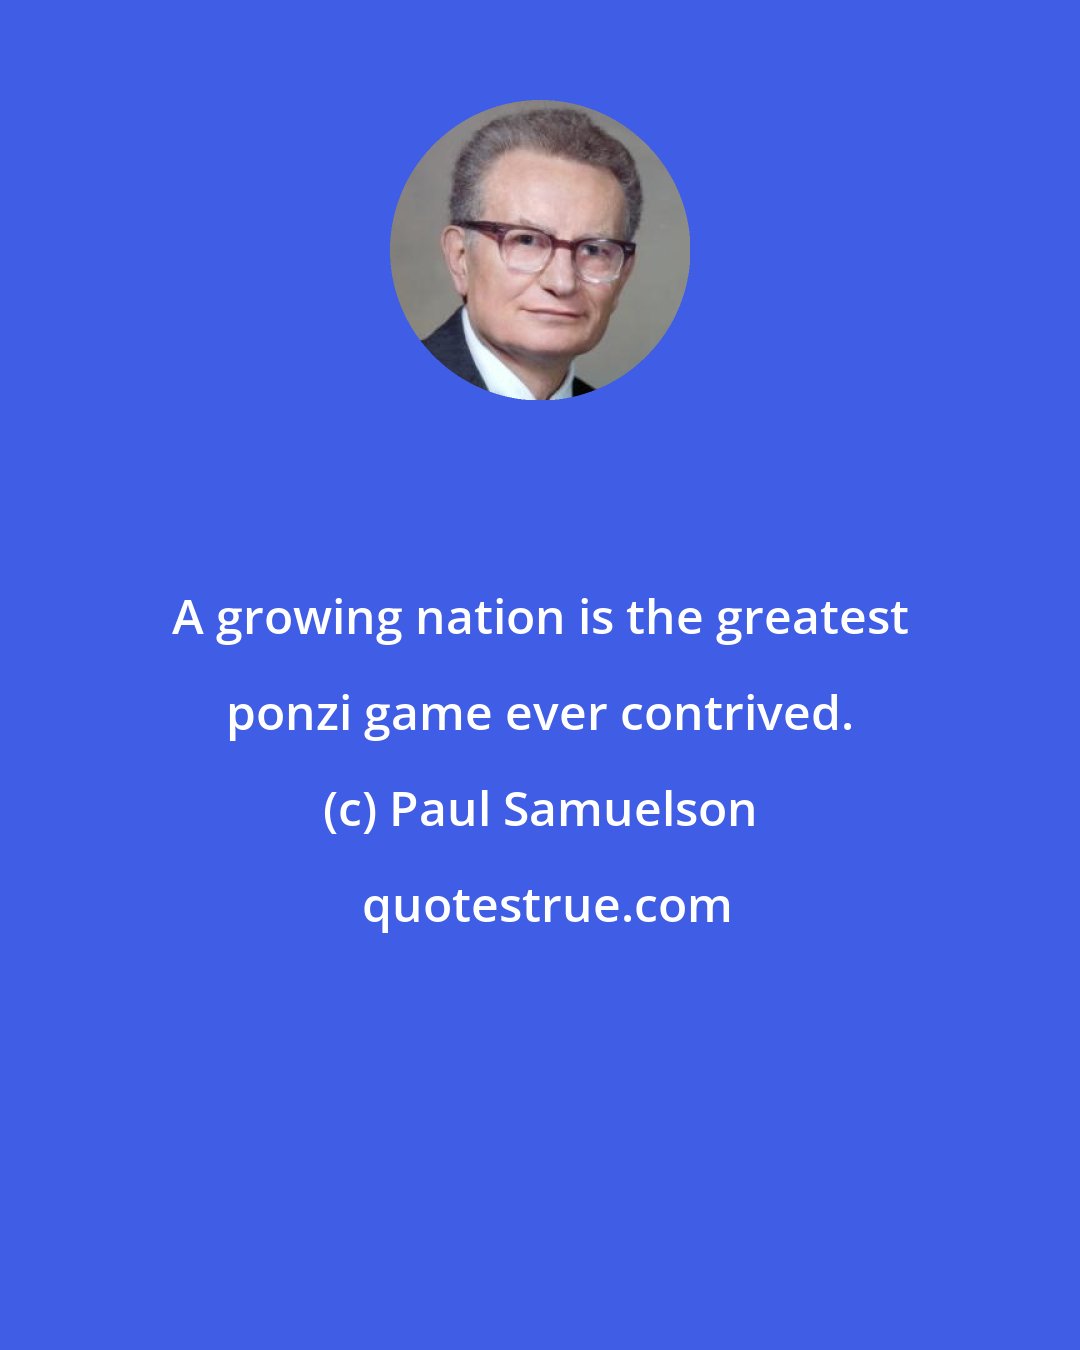 Paul Samuelson: A growing nation is the greatest ponzi game ever contrived.